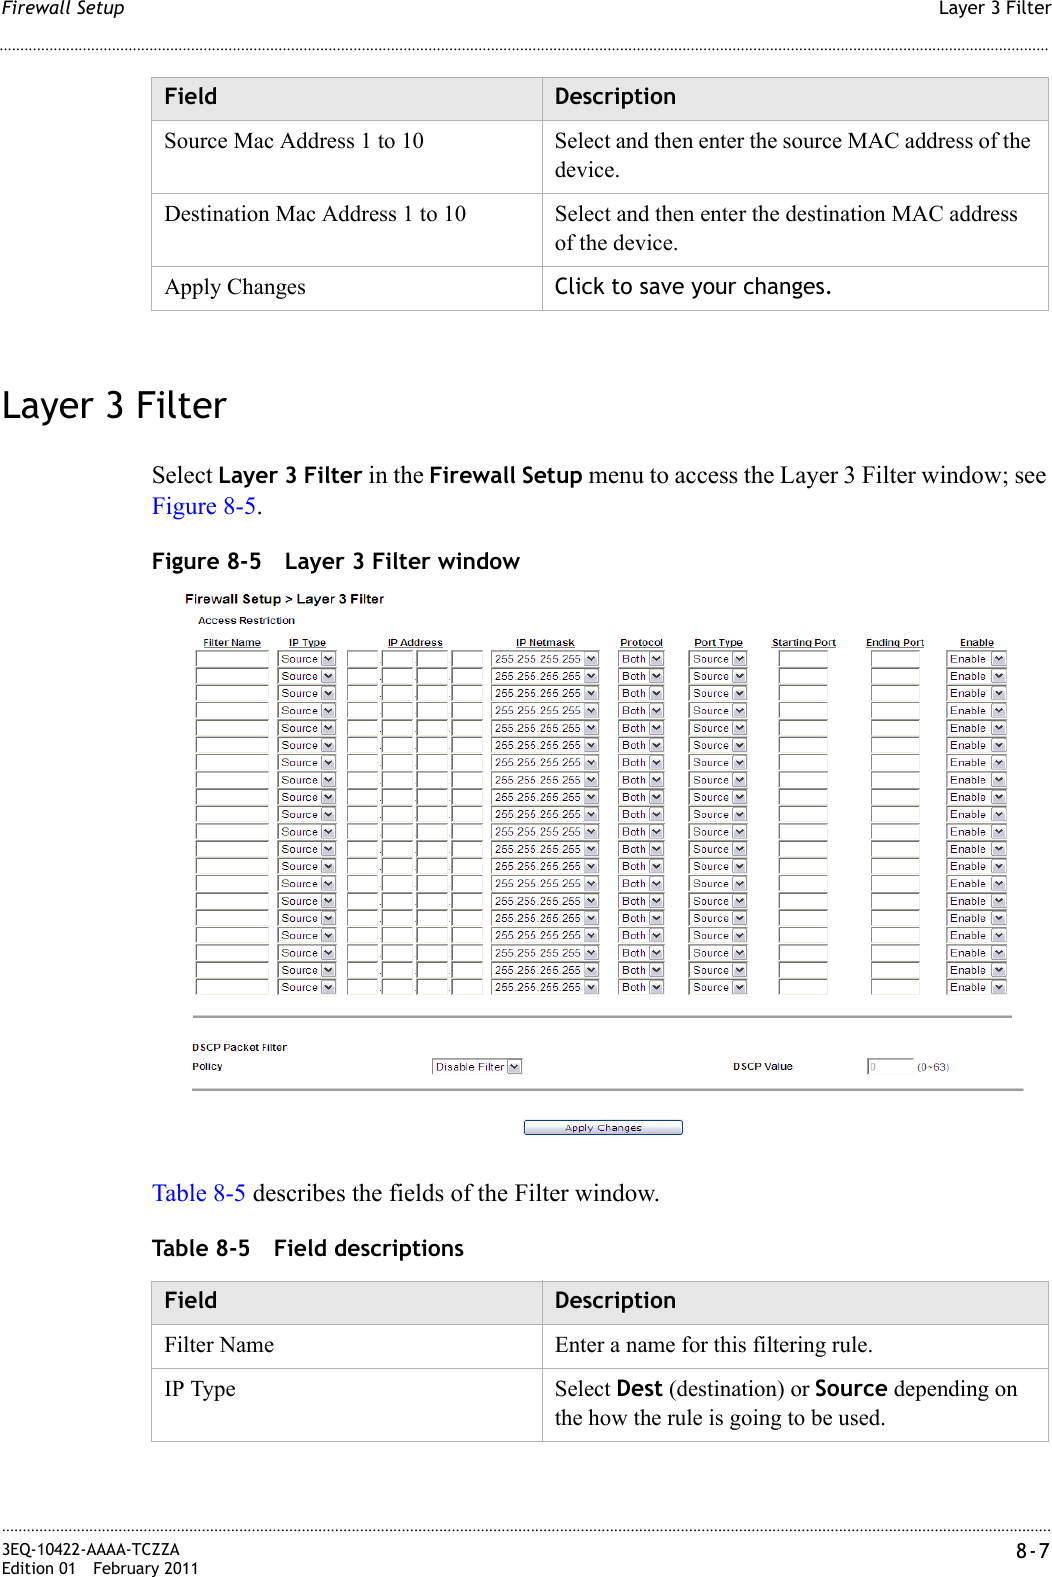 Layer 3 FilterFirewall Setup............................................................................................................................................................................................................................................................3EQ-10422-AAAA-TCZZAEdition 01 February 2011 8-7............................................................................................................................................................................................................................................................Layer 3 FilterSelect Layer 3 Filter in the Firewall Setup menu to access the Layer 3 Filter window; see Figure 8-5.Figure 8-5 Layer 3 Filter windowTable 8-5 describes the fields of the Filter window.Table 8-5 Field descriptionsSource Mac Address 1 to 10 Select and then enter the source MAC address of the device.Destination Mac Address 1 to 10 Select and then enter the destination MAC address of the device.Apply Changes Click to save your changes.Field DescriptionField DescriptionFilter Name Enter a name for this filtering rule.IP Type Select Dest (destination) or Source depending on the how the rule is going to be used.